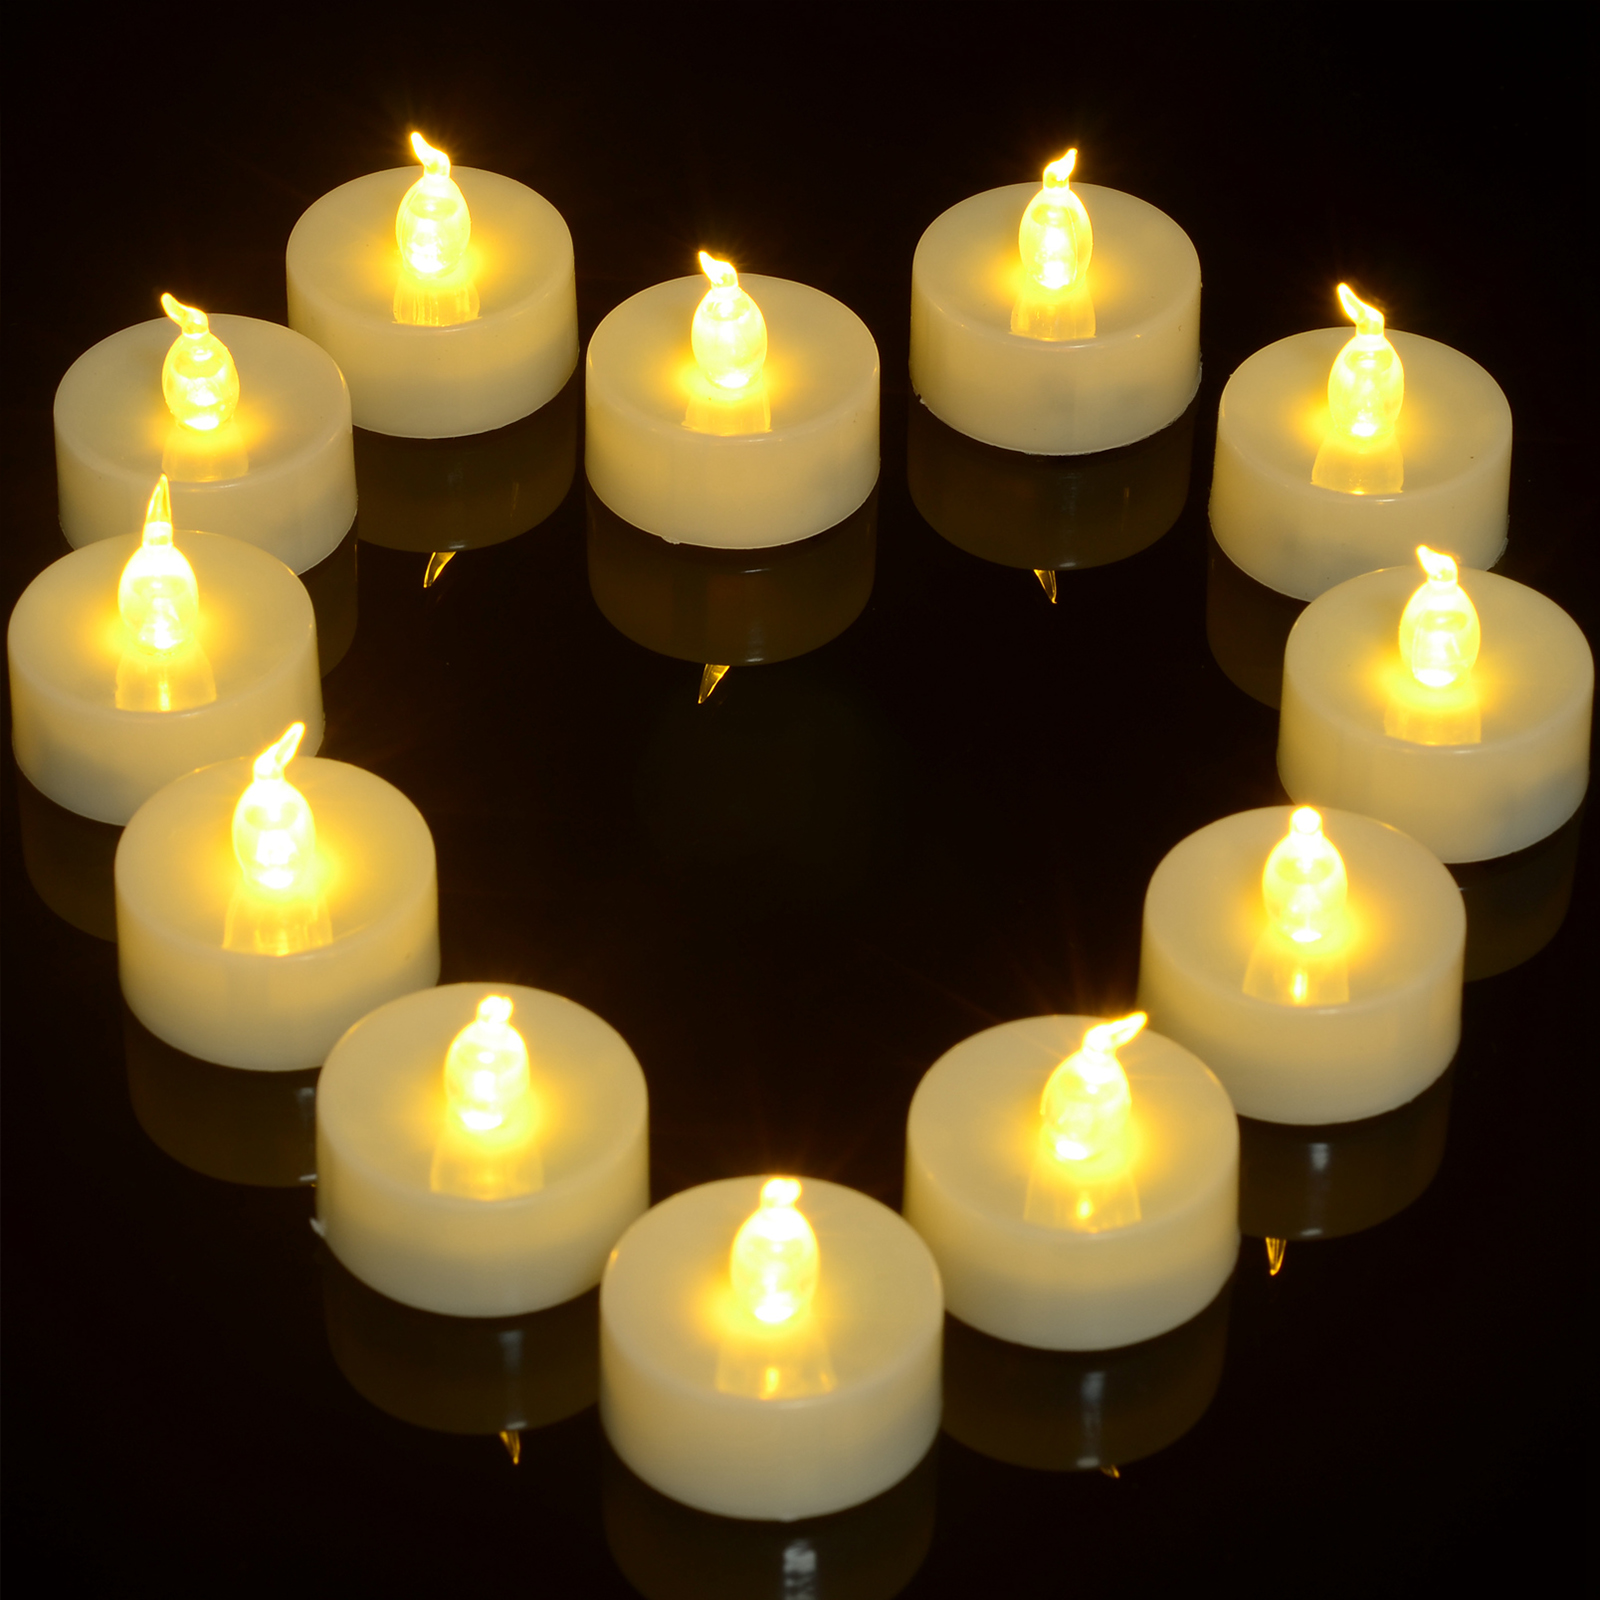 Ymenow Flameless Candles with Timer, 12pcs Beige Battery Operated LED Flickering Tea Lights Votive Ca